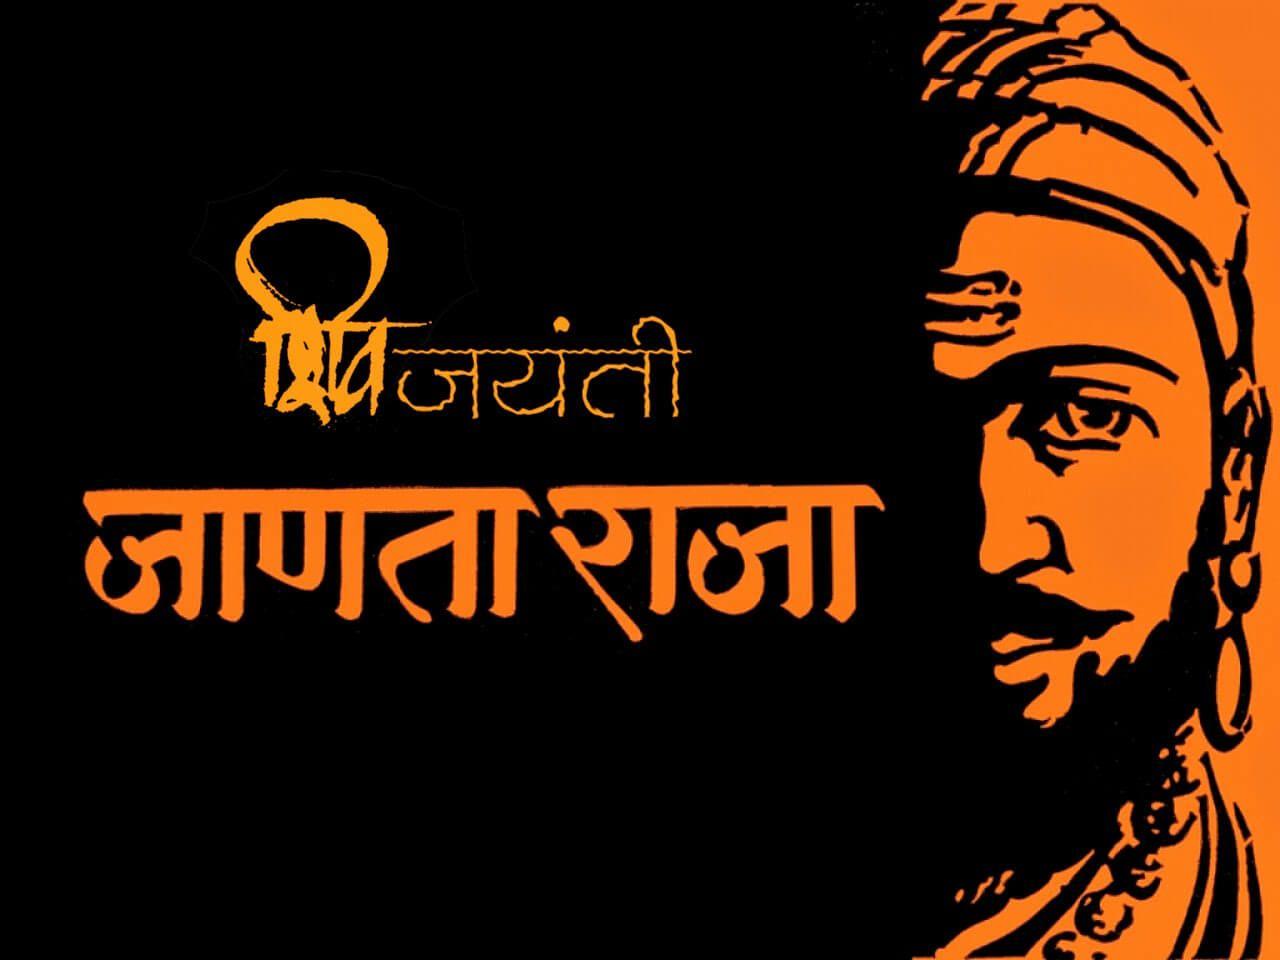 Best Shivaji Jayanti Image, Pics Download In High Resolution New Wallpaper. HD High Quality Motion